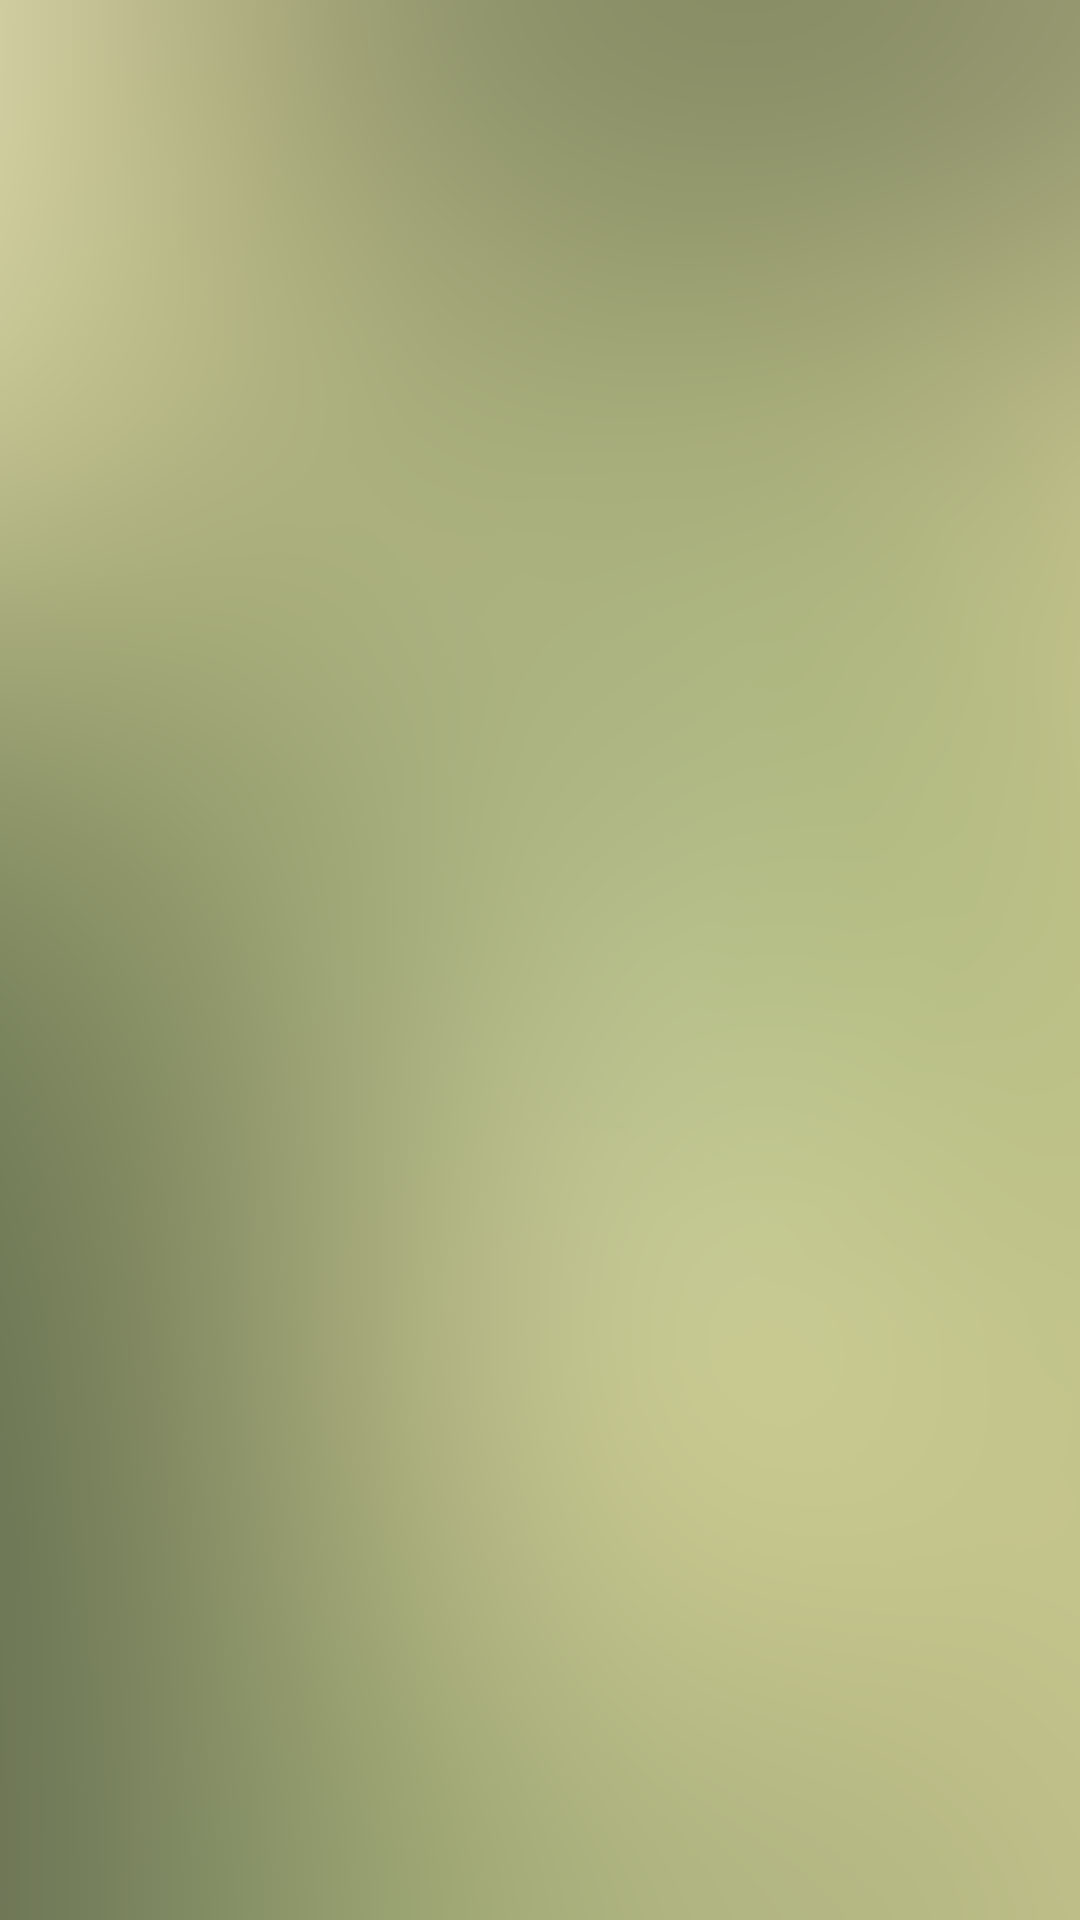 1080x1920 Nature Light Green Gradient Android Wallpaper ...